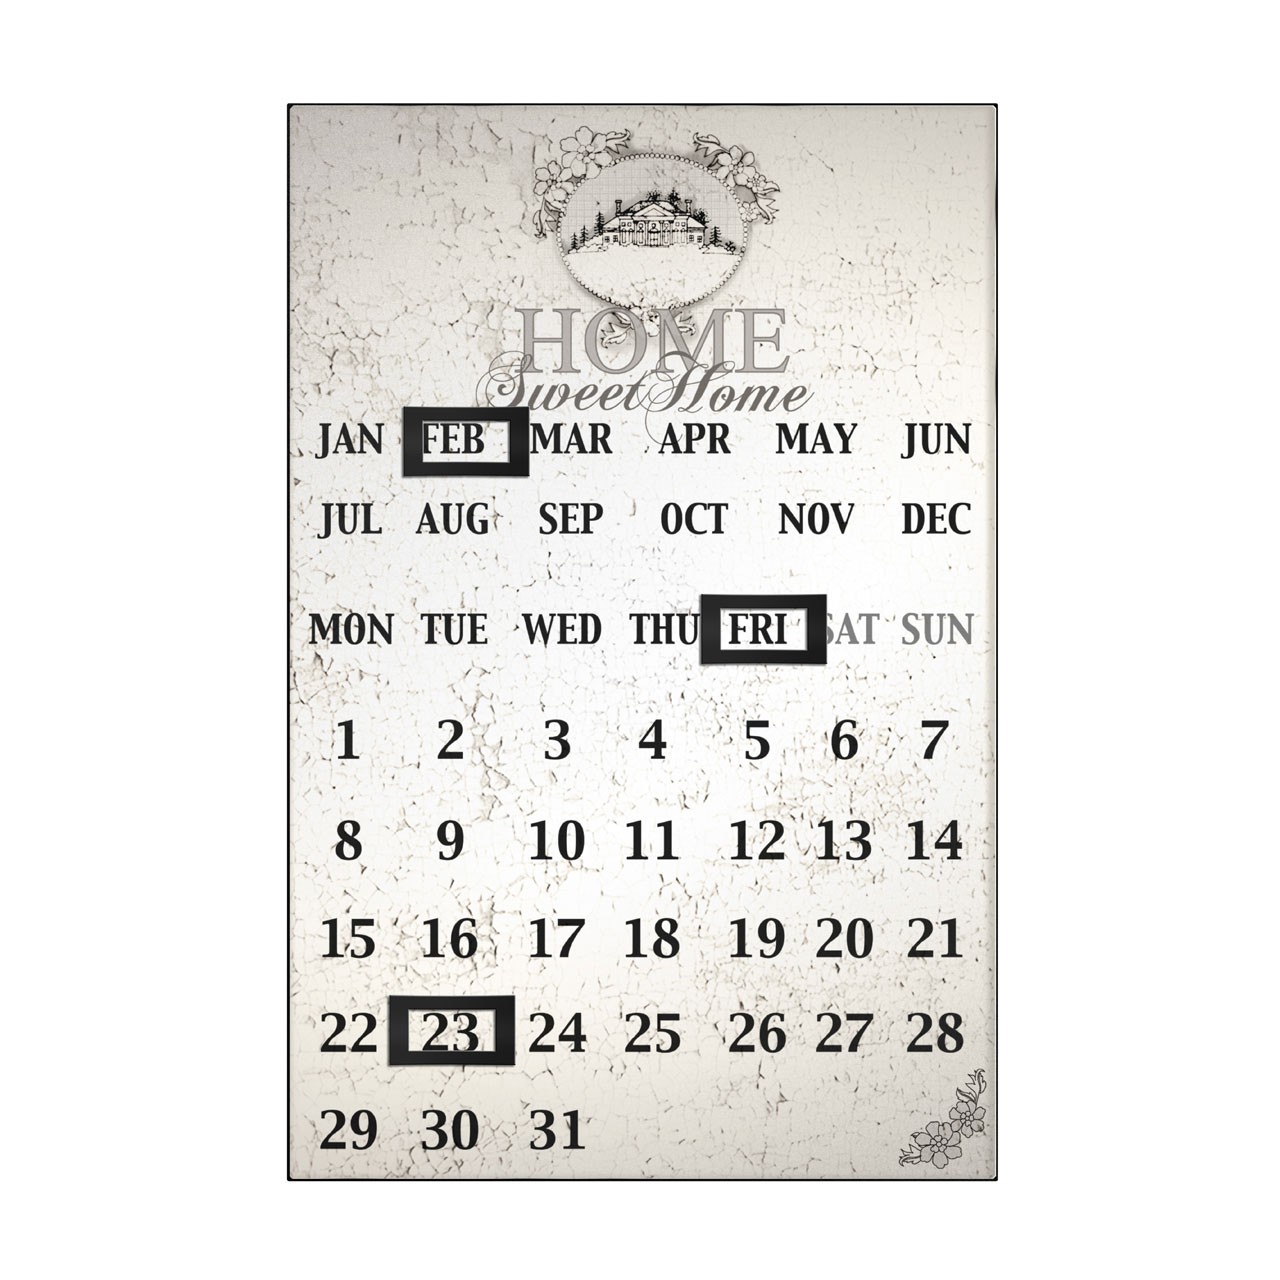 Home Sweet Home Magnetic Calendar Keep Up to Date Daily Routines